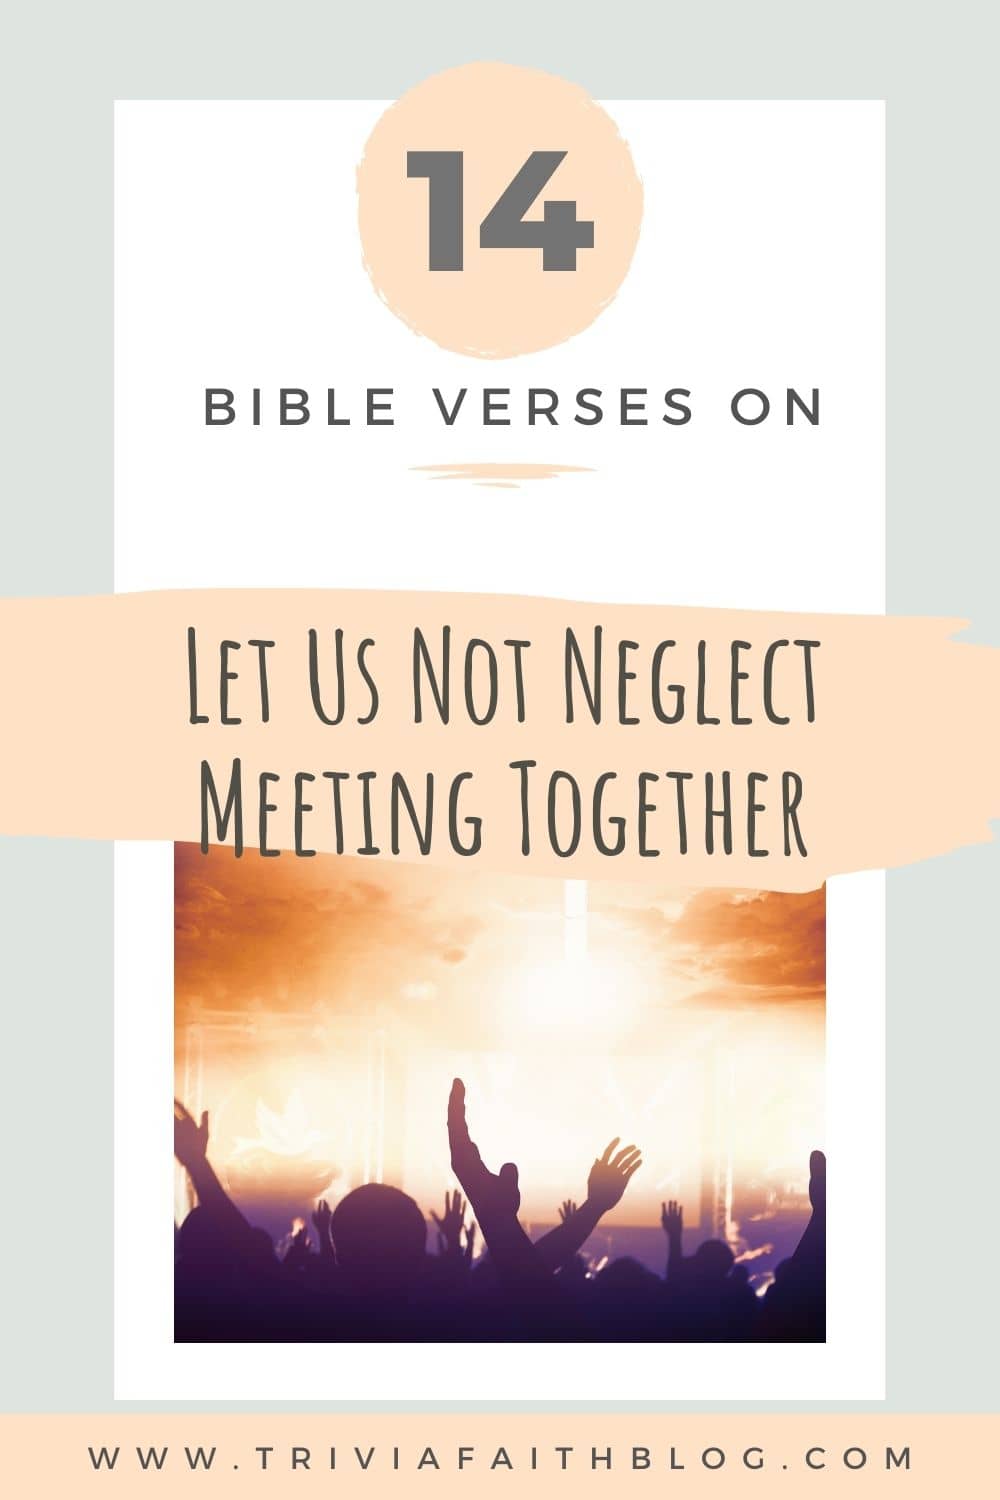 Let Us Not Neglect Meeting Together